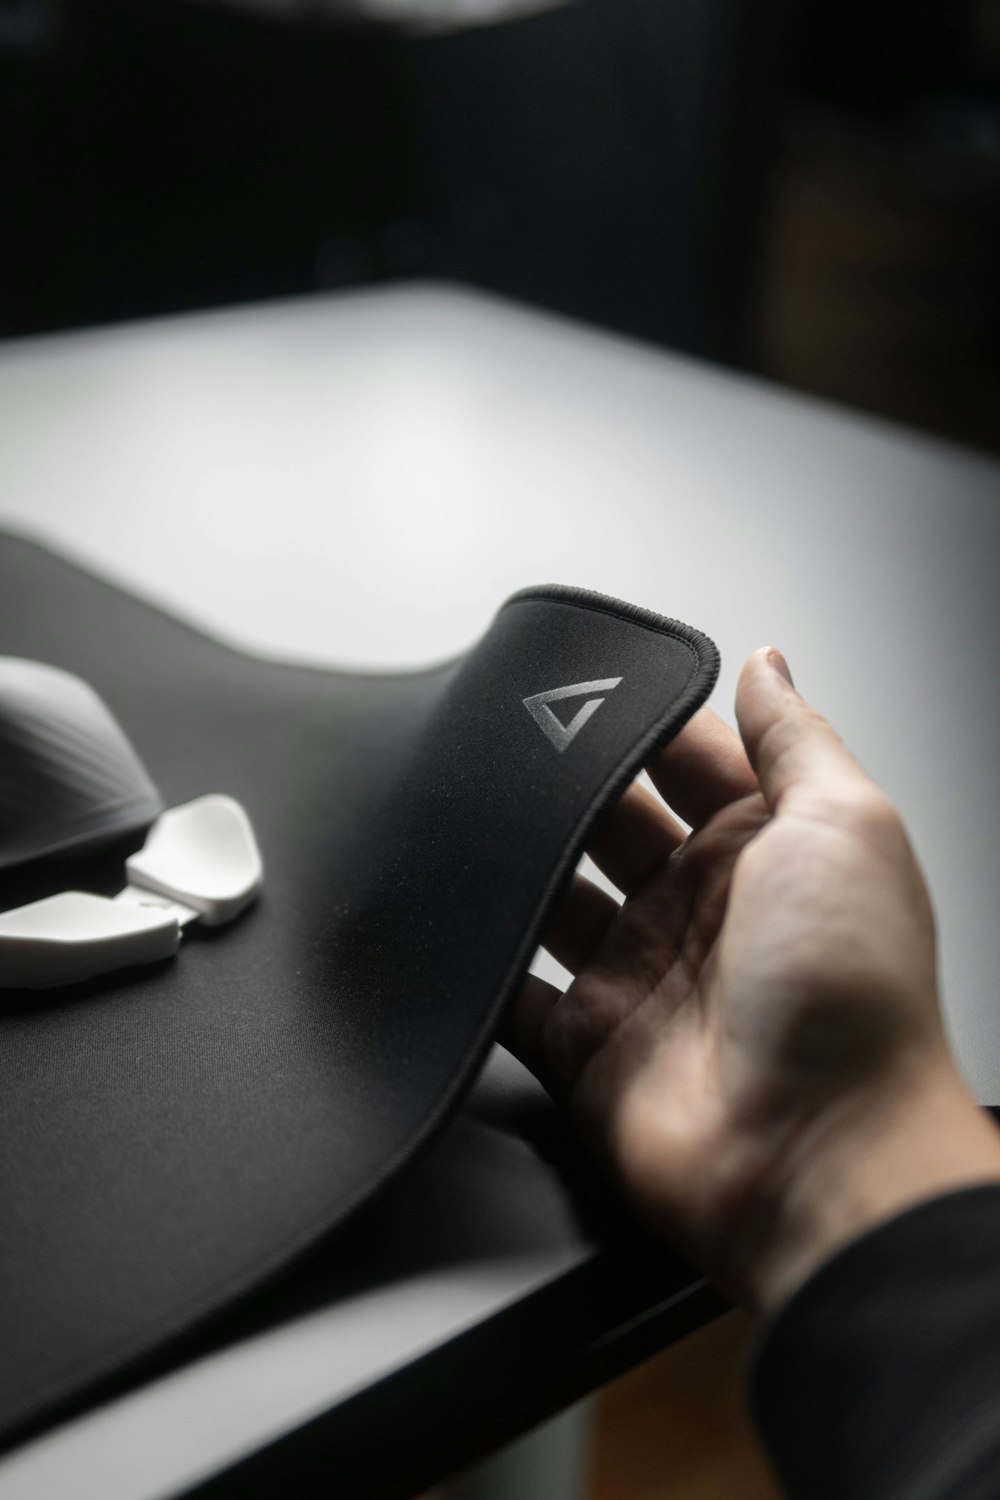 a person's hand on a mouse pad on a desk